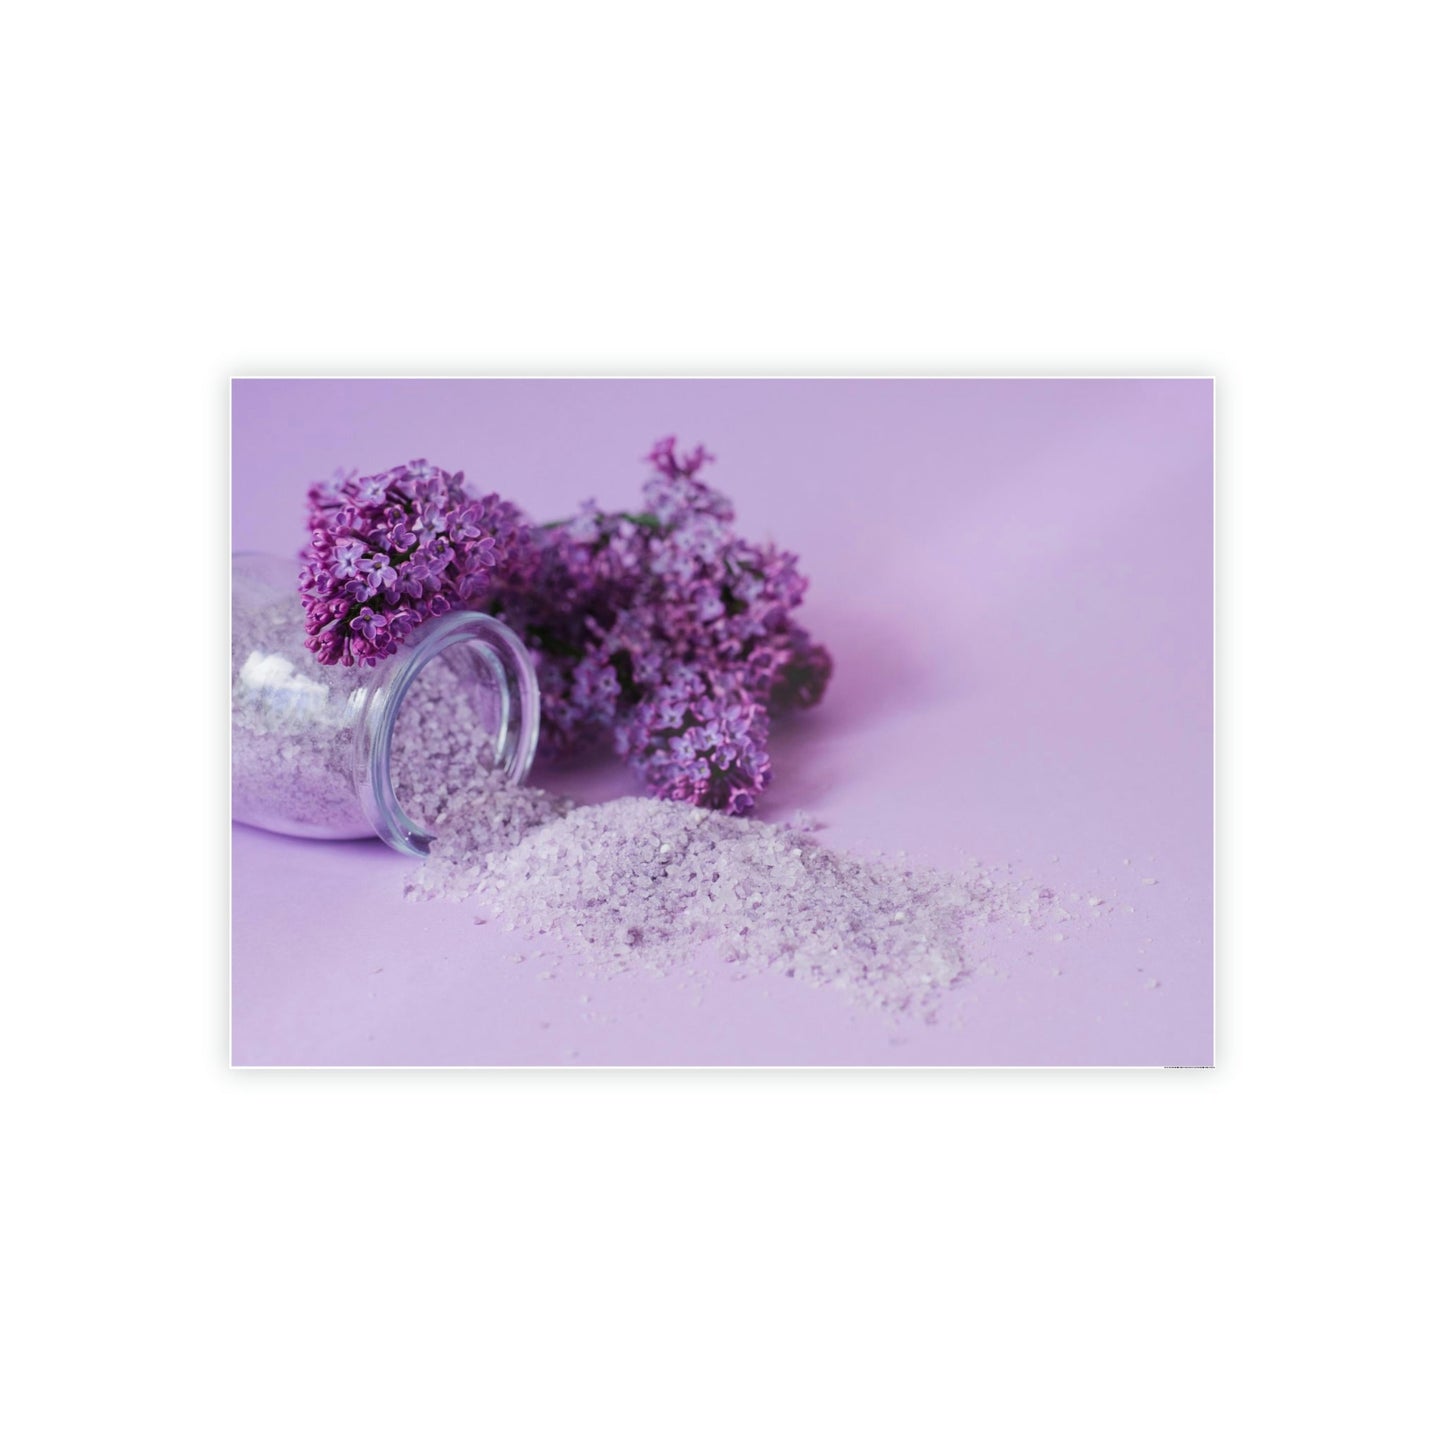 A Fragrant Bouquet of Lilacs: Capturing the Essence of Spring